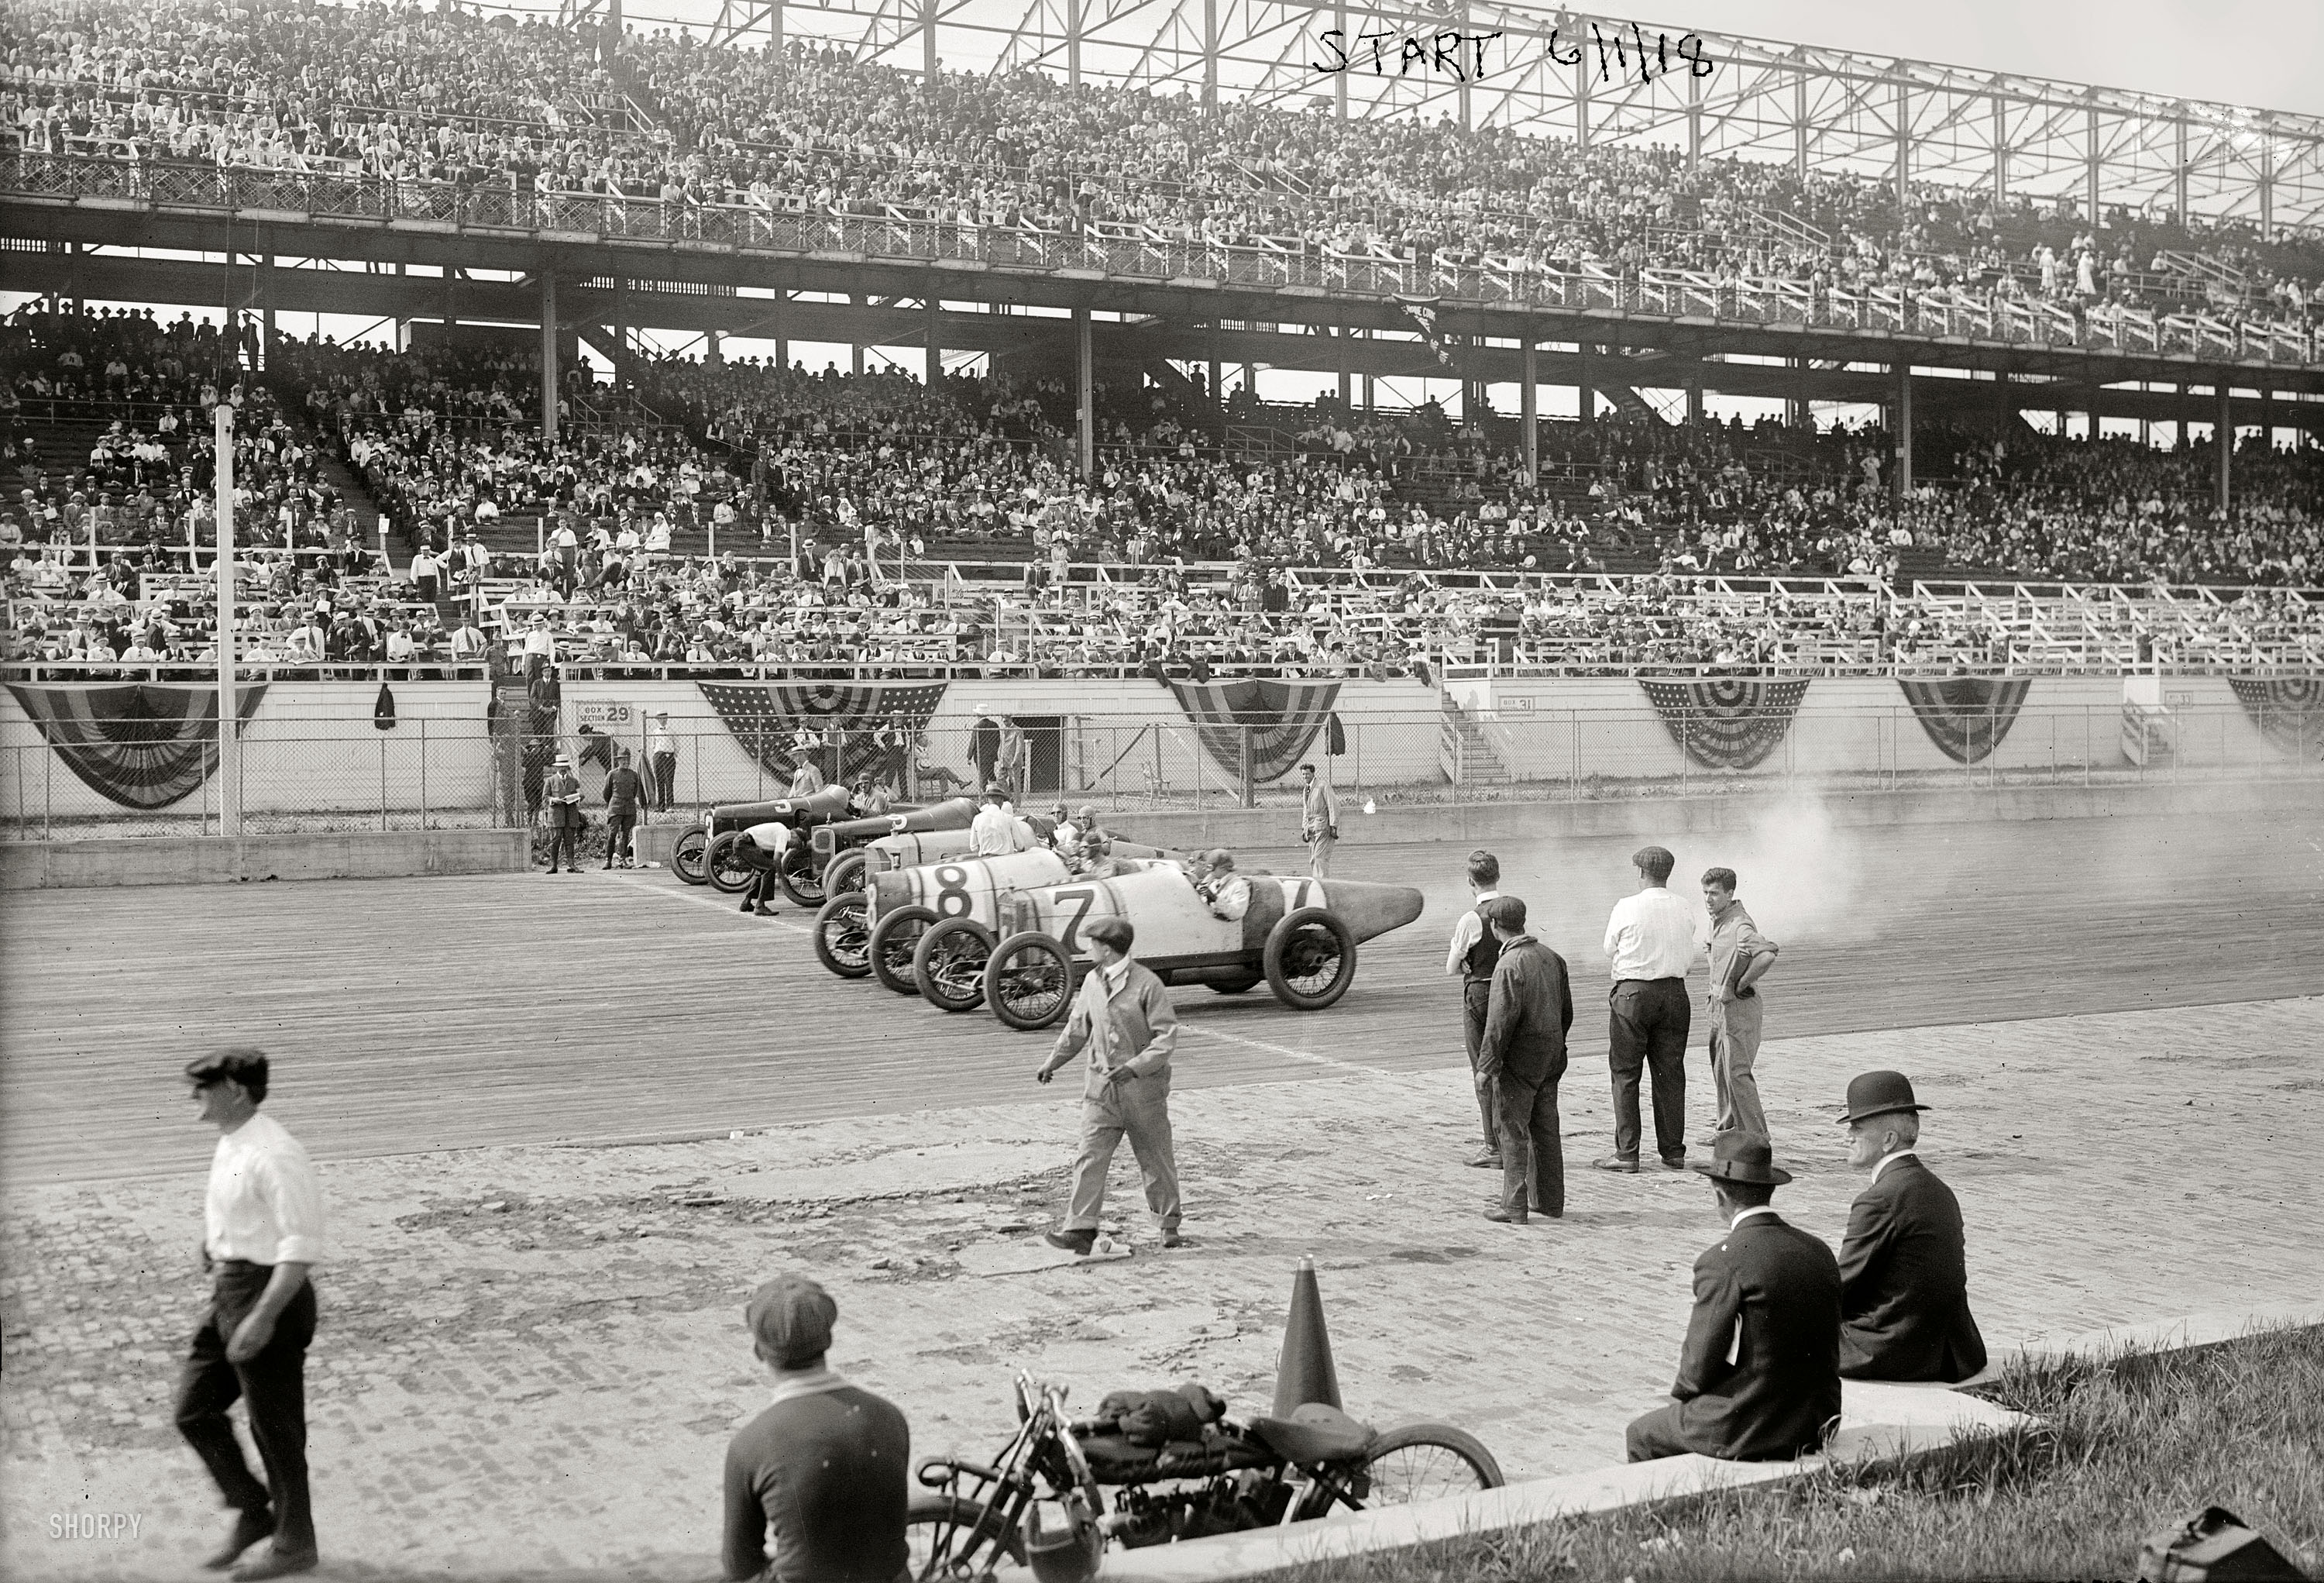 June 1, 1918. Six of the eight contestants in the 100-mile Harkness Handicap on Sheepshead Bay Motor Speedway's two-mile wooden oval in Brooklyn, New York. 5x7 glass negative, George Grantham Bain Collection. View full size.